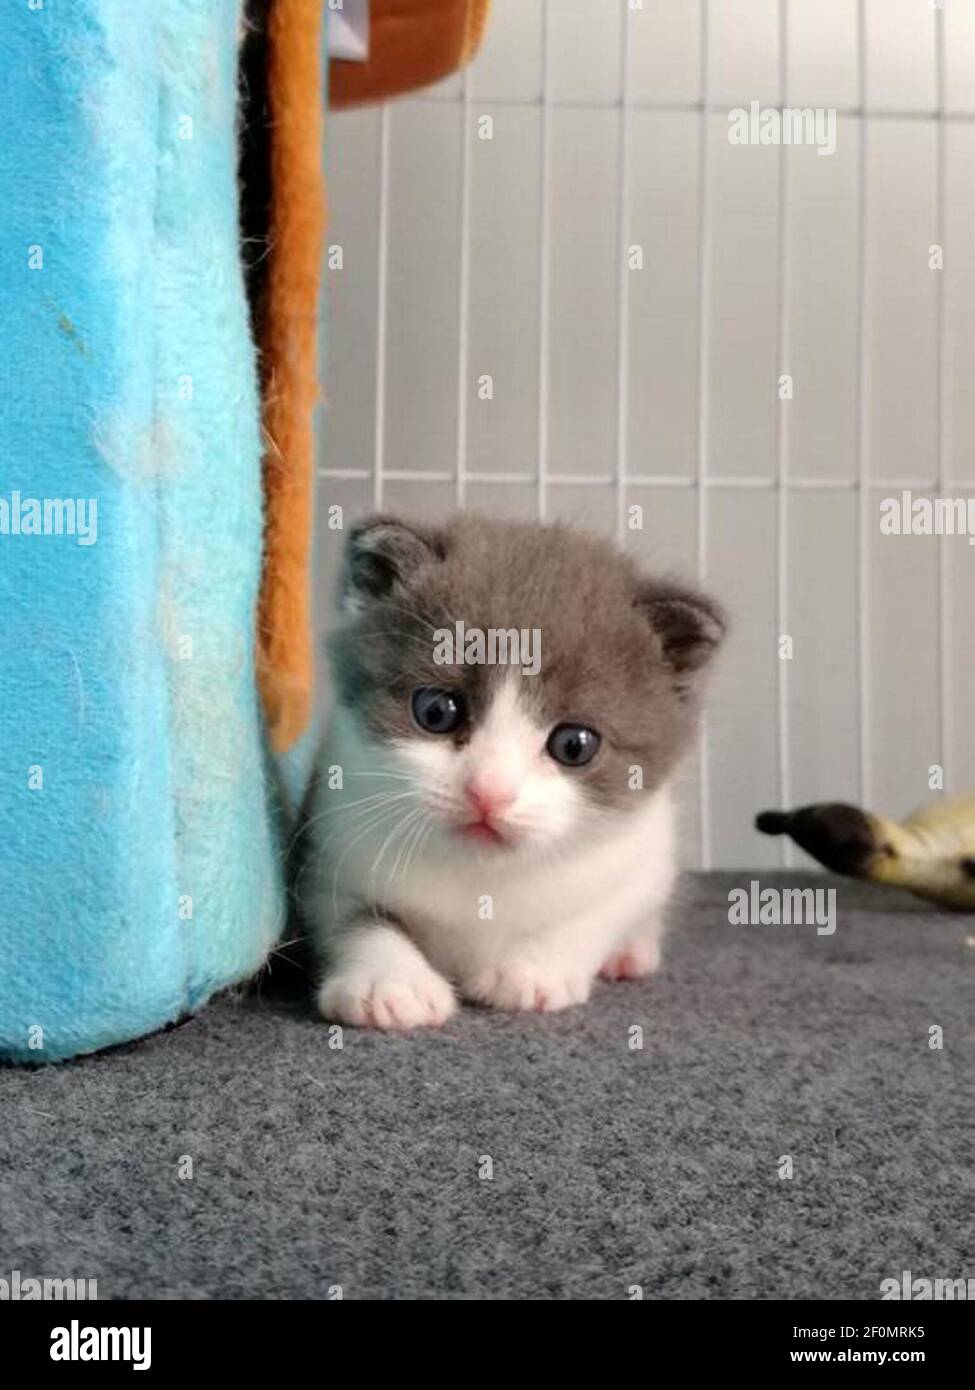 A group of photos released by Sinogene Biotechnology Company show the cloned kitten 'Garlic' born on July 21, which is the first successfully cloned cat in the country, in Beijing, China. Cat lovers who are devastated by the death of their beloved felines may soon be able to have their pets cloned, following the birth of China's first cloned kitten. The cloned kitten, named 'Garlic,' was born on July 21 and cloned at the laboratories of Sinogene Biotechnology Company in Beijing. The company started its experiment on cat cloning in August 2018, and Garlic, a British shorthair, was born 66 days  Stock Photo